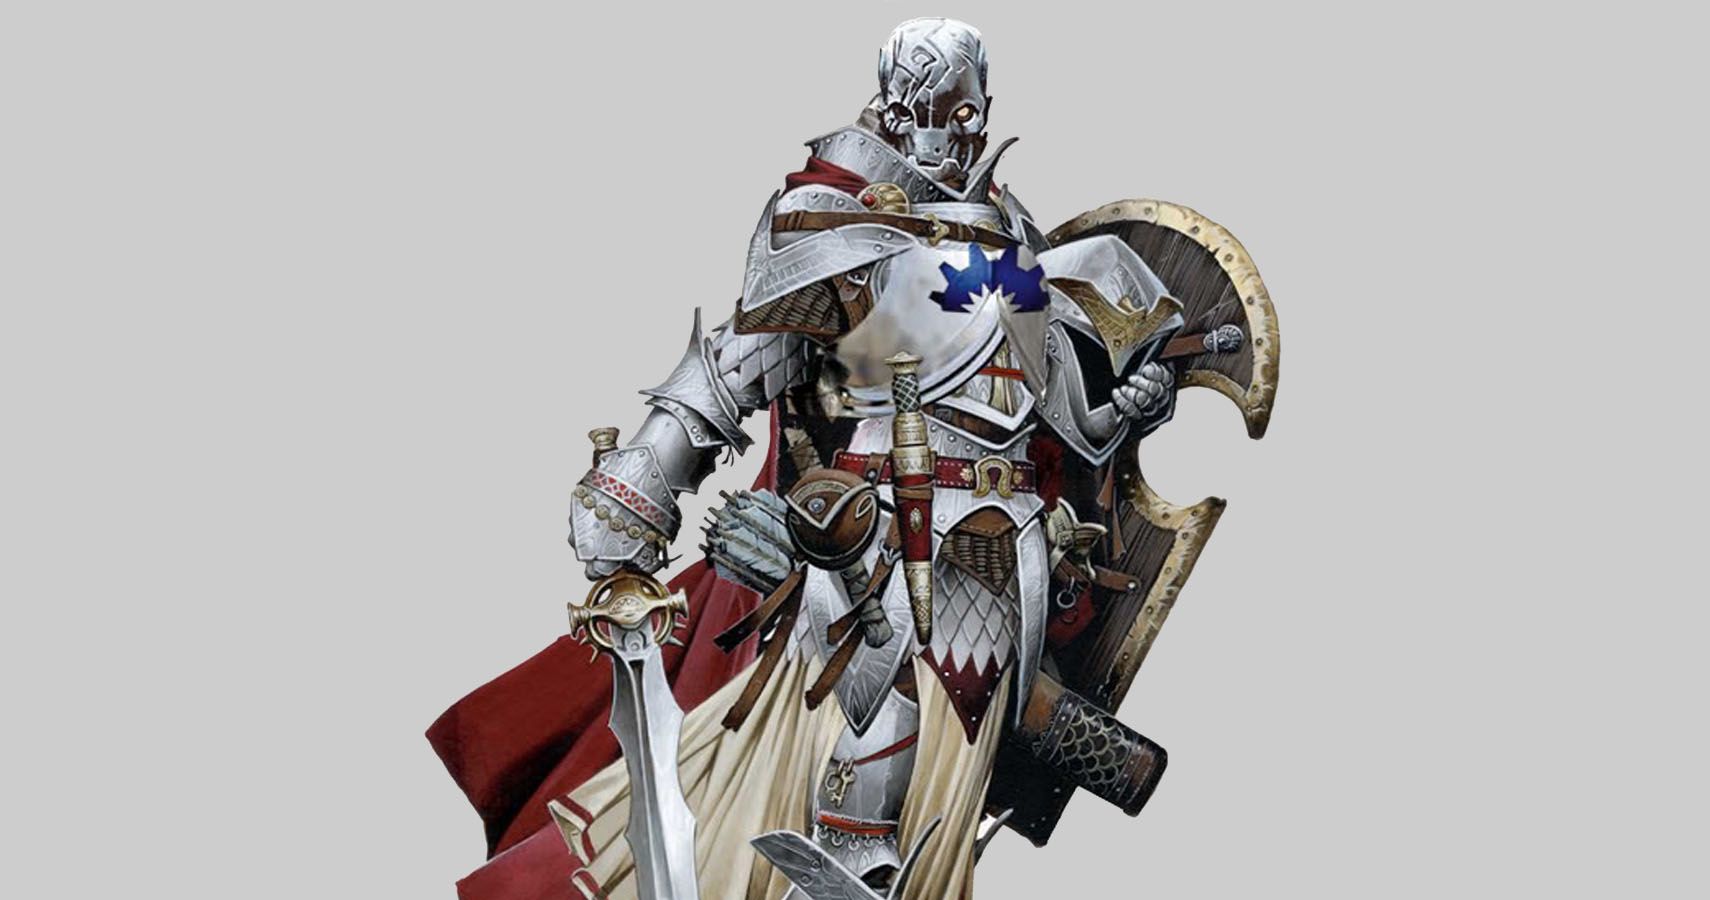 warforged race for dnd 5e character builder